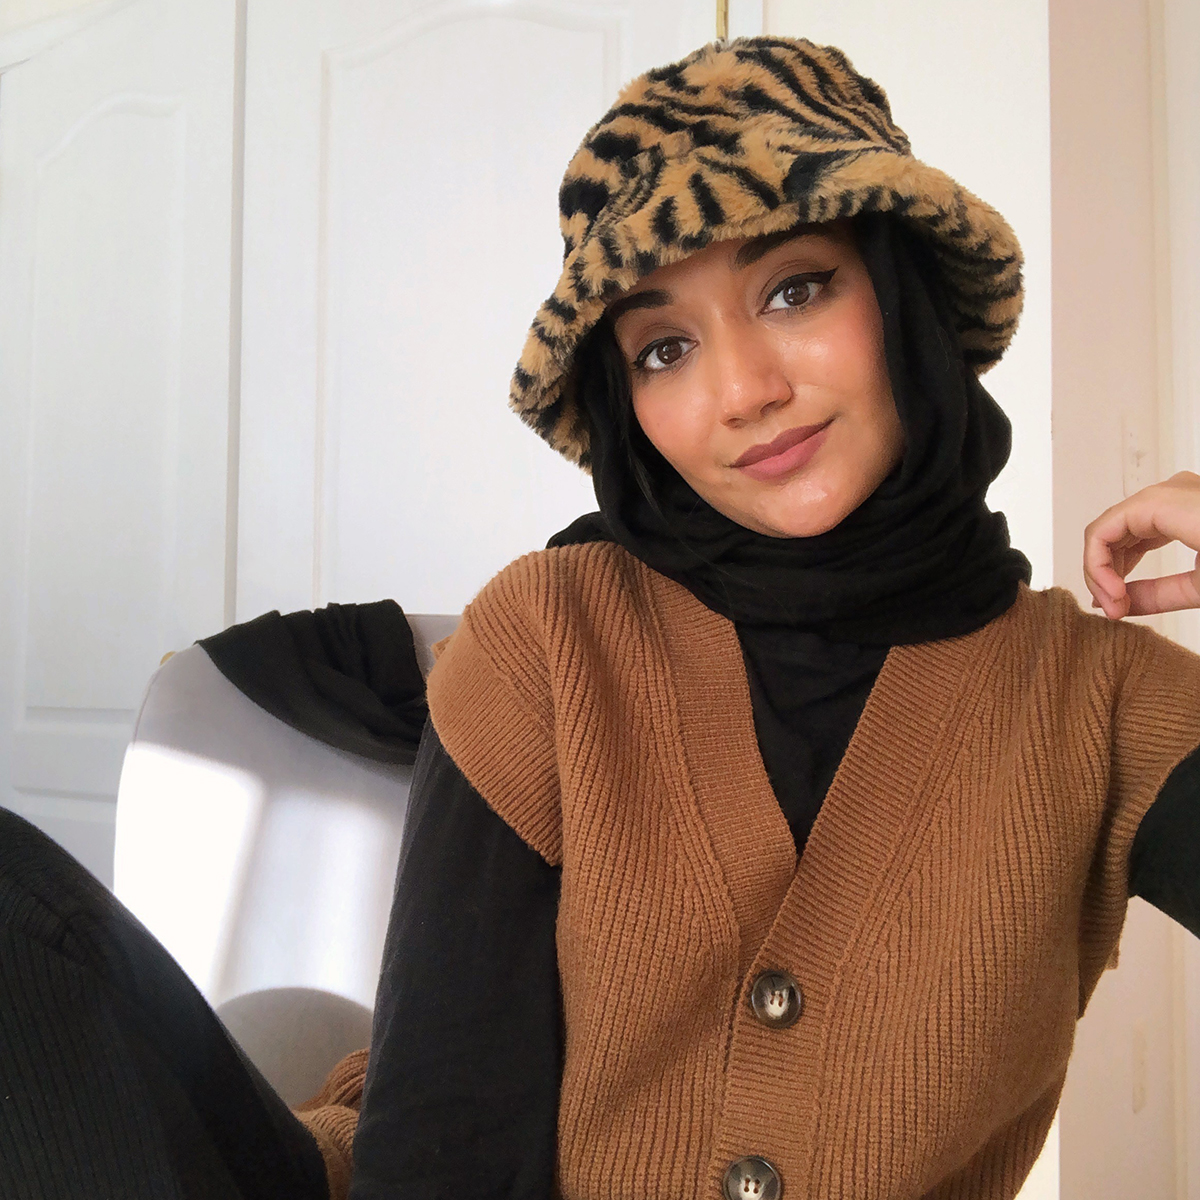 24 Winter Hats for Women That Are Chic and Warm